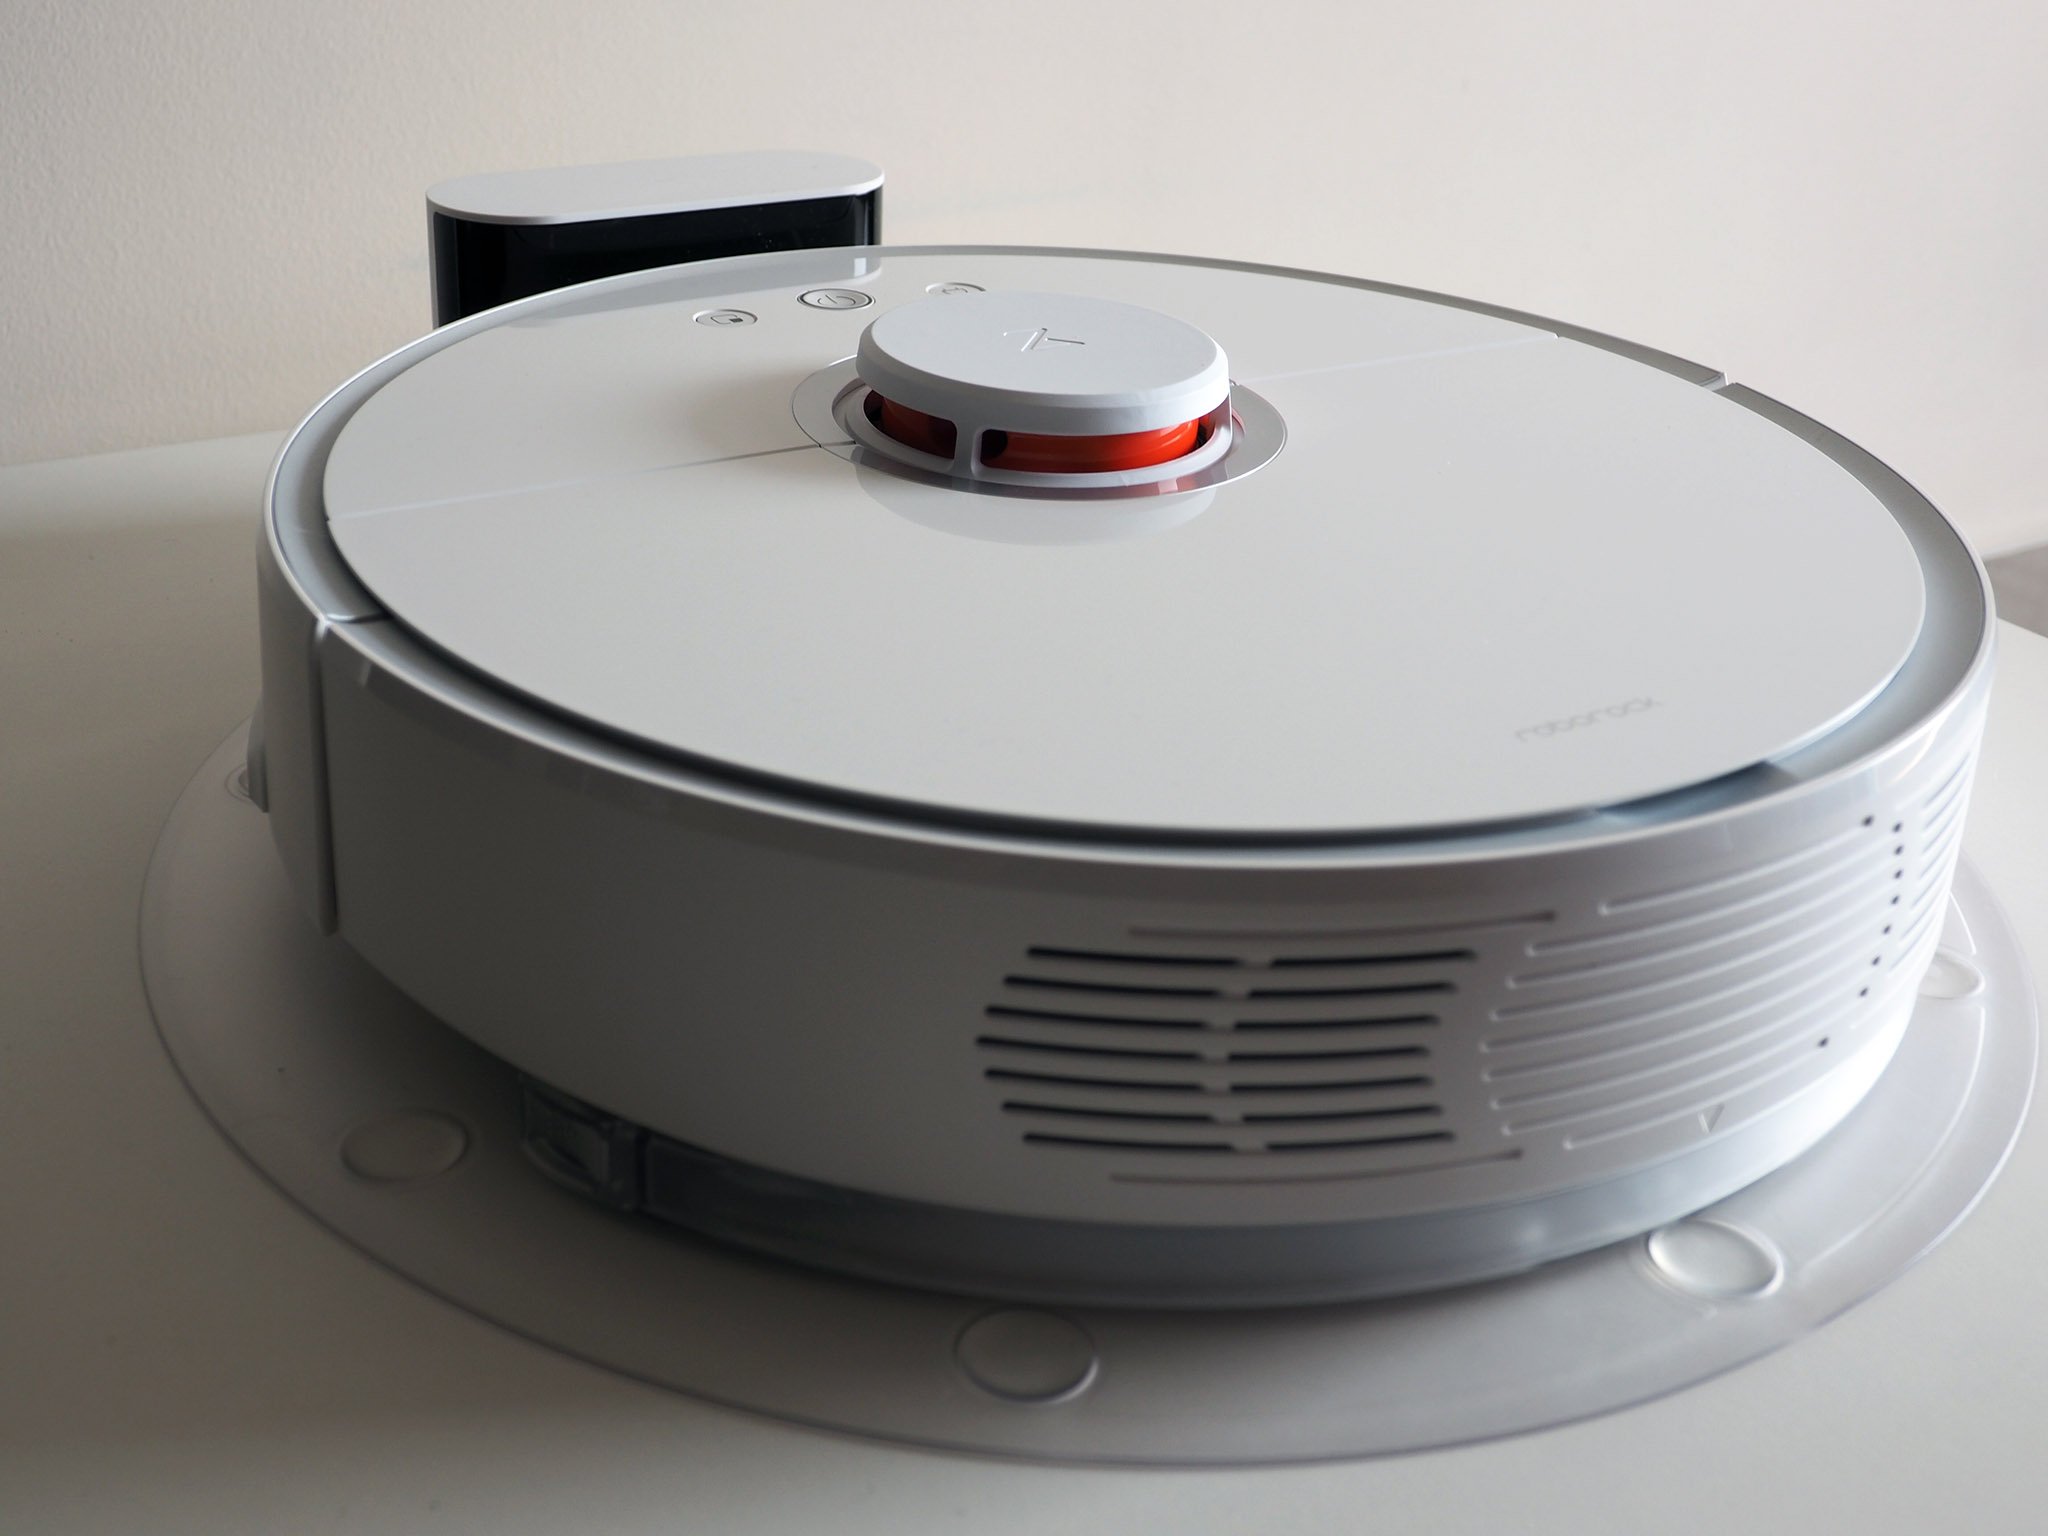 Affect Surroundings overlook Xiaomi Mi Robot Vacuum Cleaner review: A worthy upgrade | Android Central